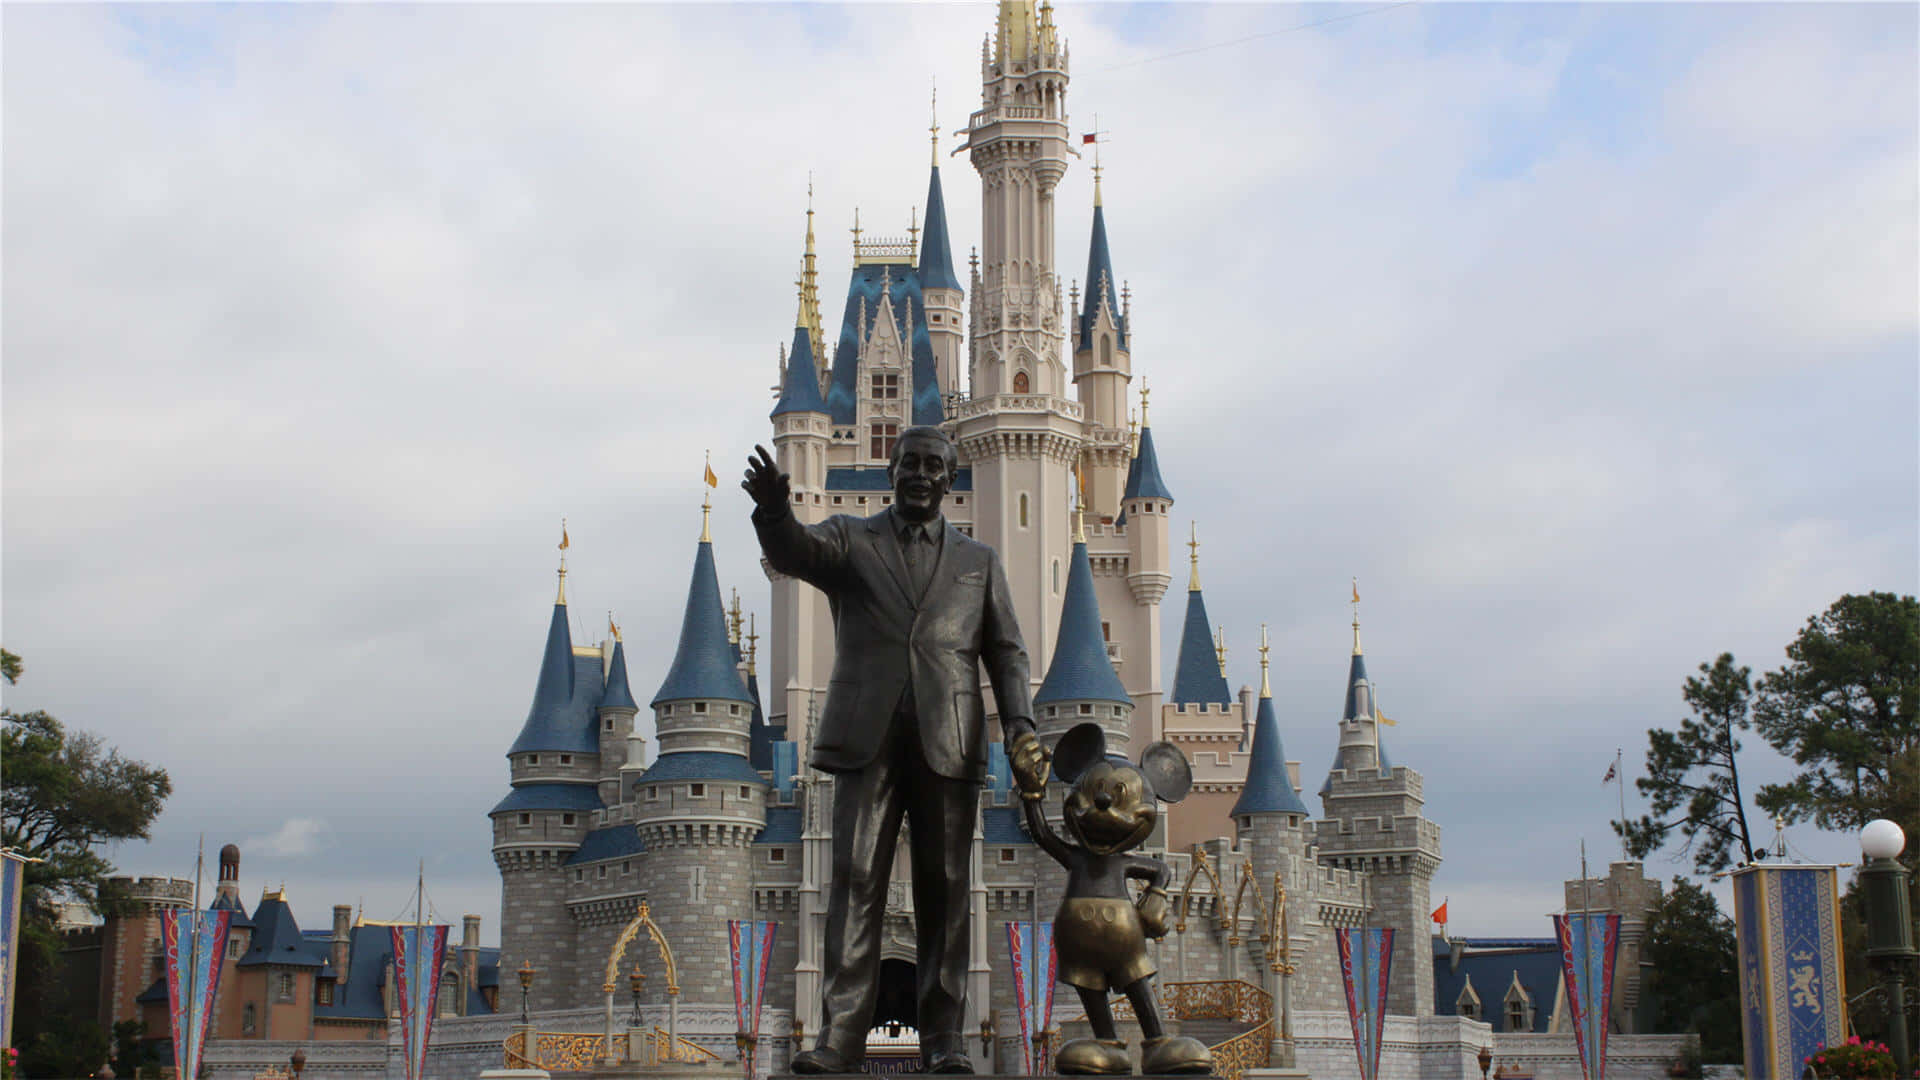 Explore the magical world of Walt Disney with a visit to Disney Castle